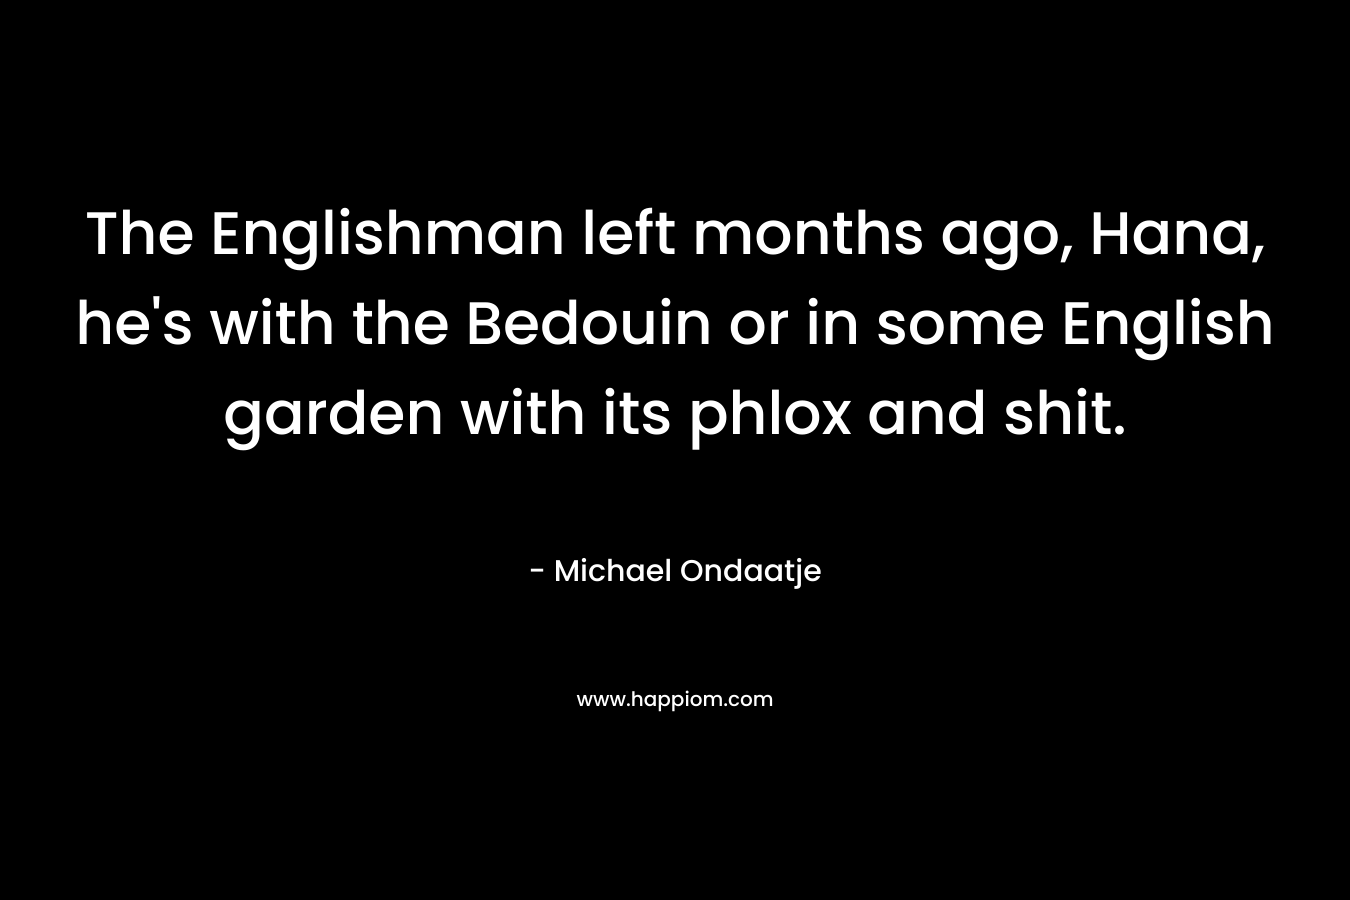 The Englishman left months ago, Hana, he’s with the Bedouin or in some English garden with its phlox and shit. – Michael Ondaatje